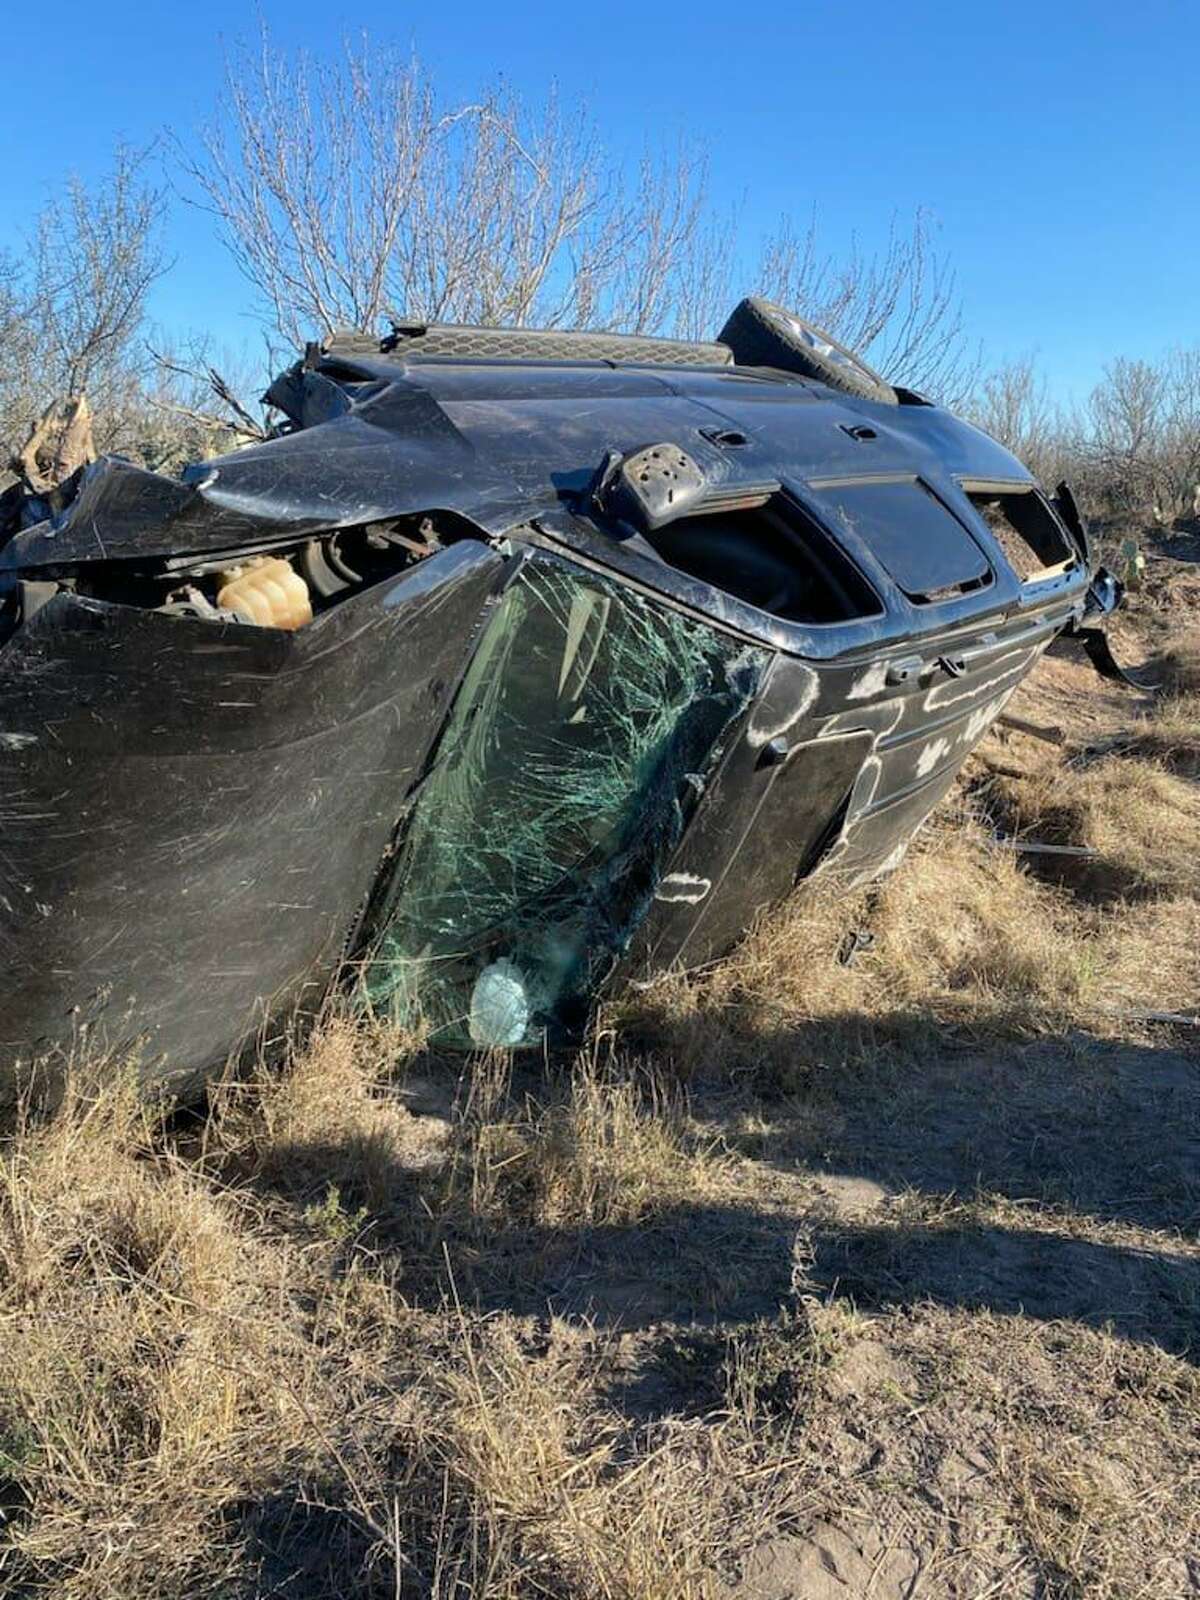 The Texas Department of Public Safety said the driver of this vehicle was transporting multiple immigrants before rolling over and crashing into a ranch fence.